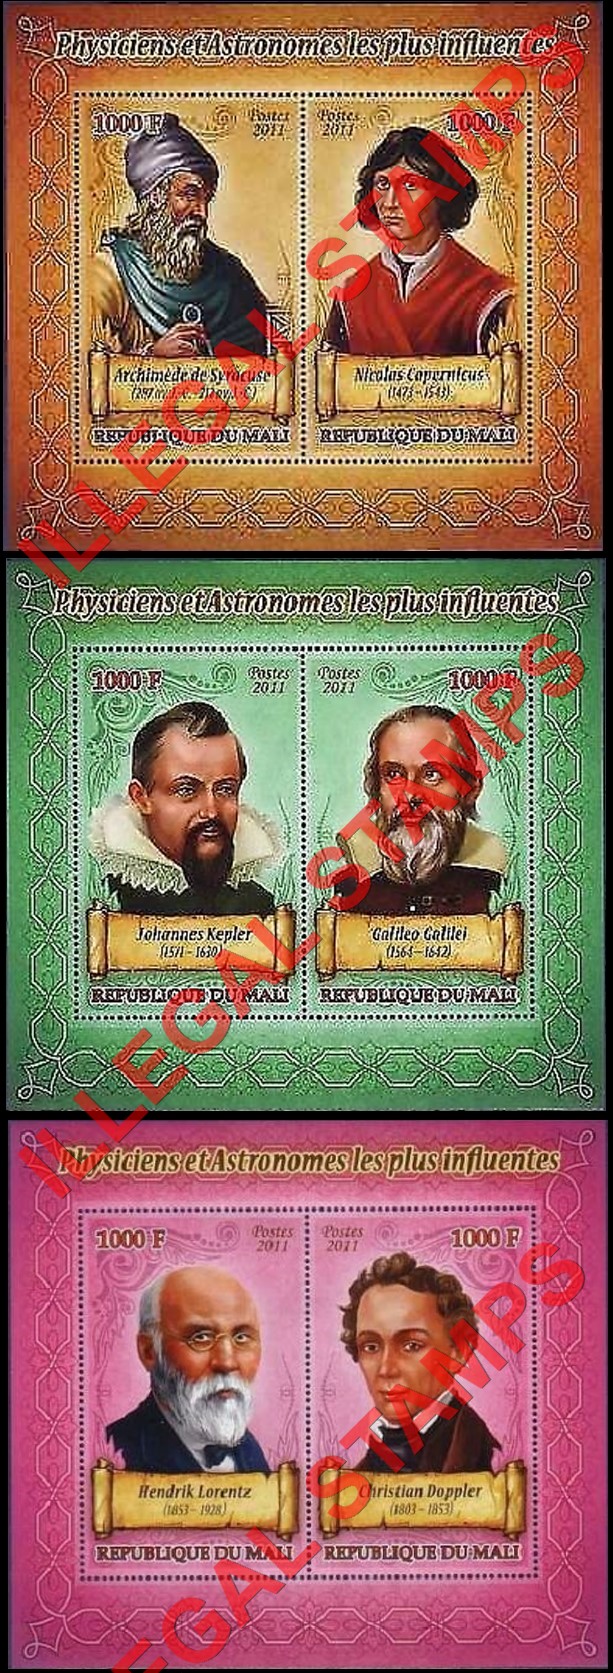 Mali 2011 Physicians and Astronomers Illegal Stamp Souvenir Sheets of 2 (Part 5)